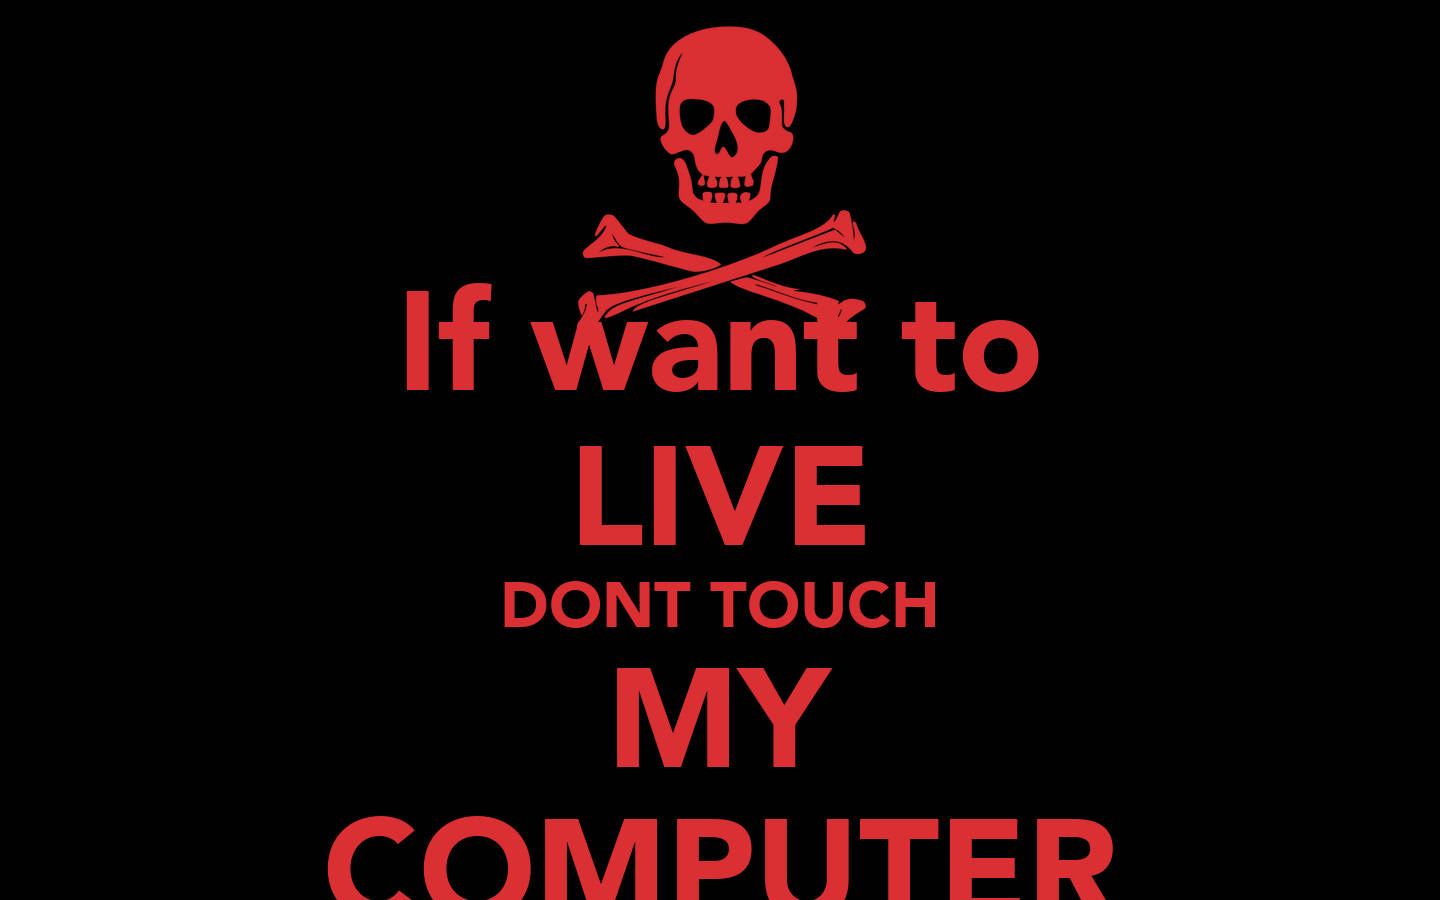 Don't Touch My Computer Live Skull Wallpaper